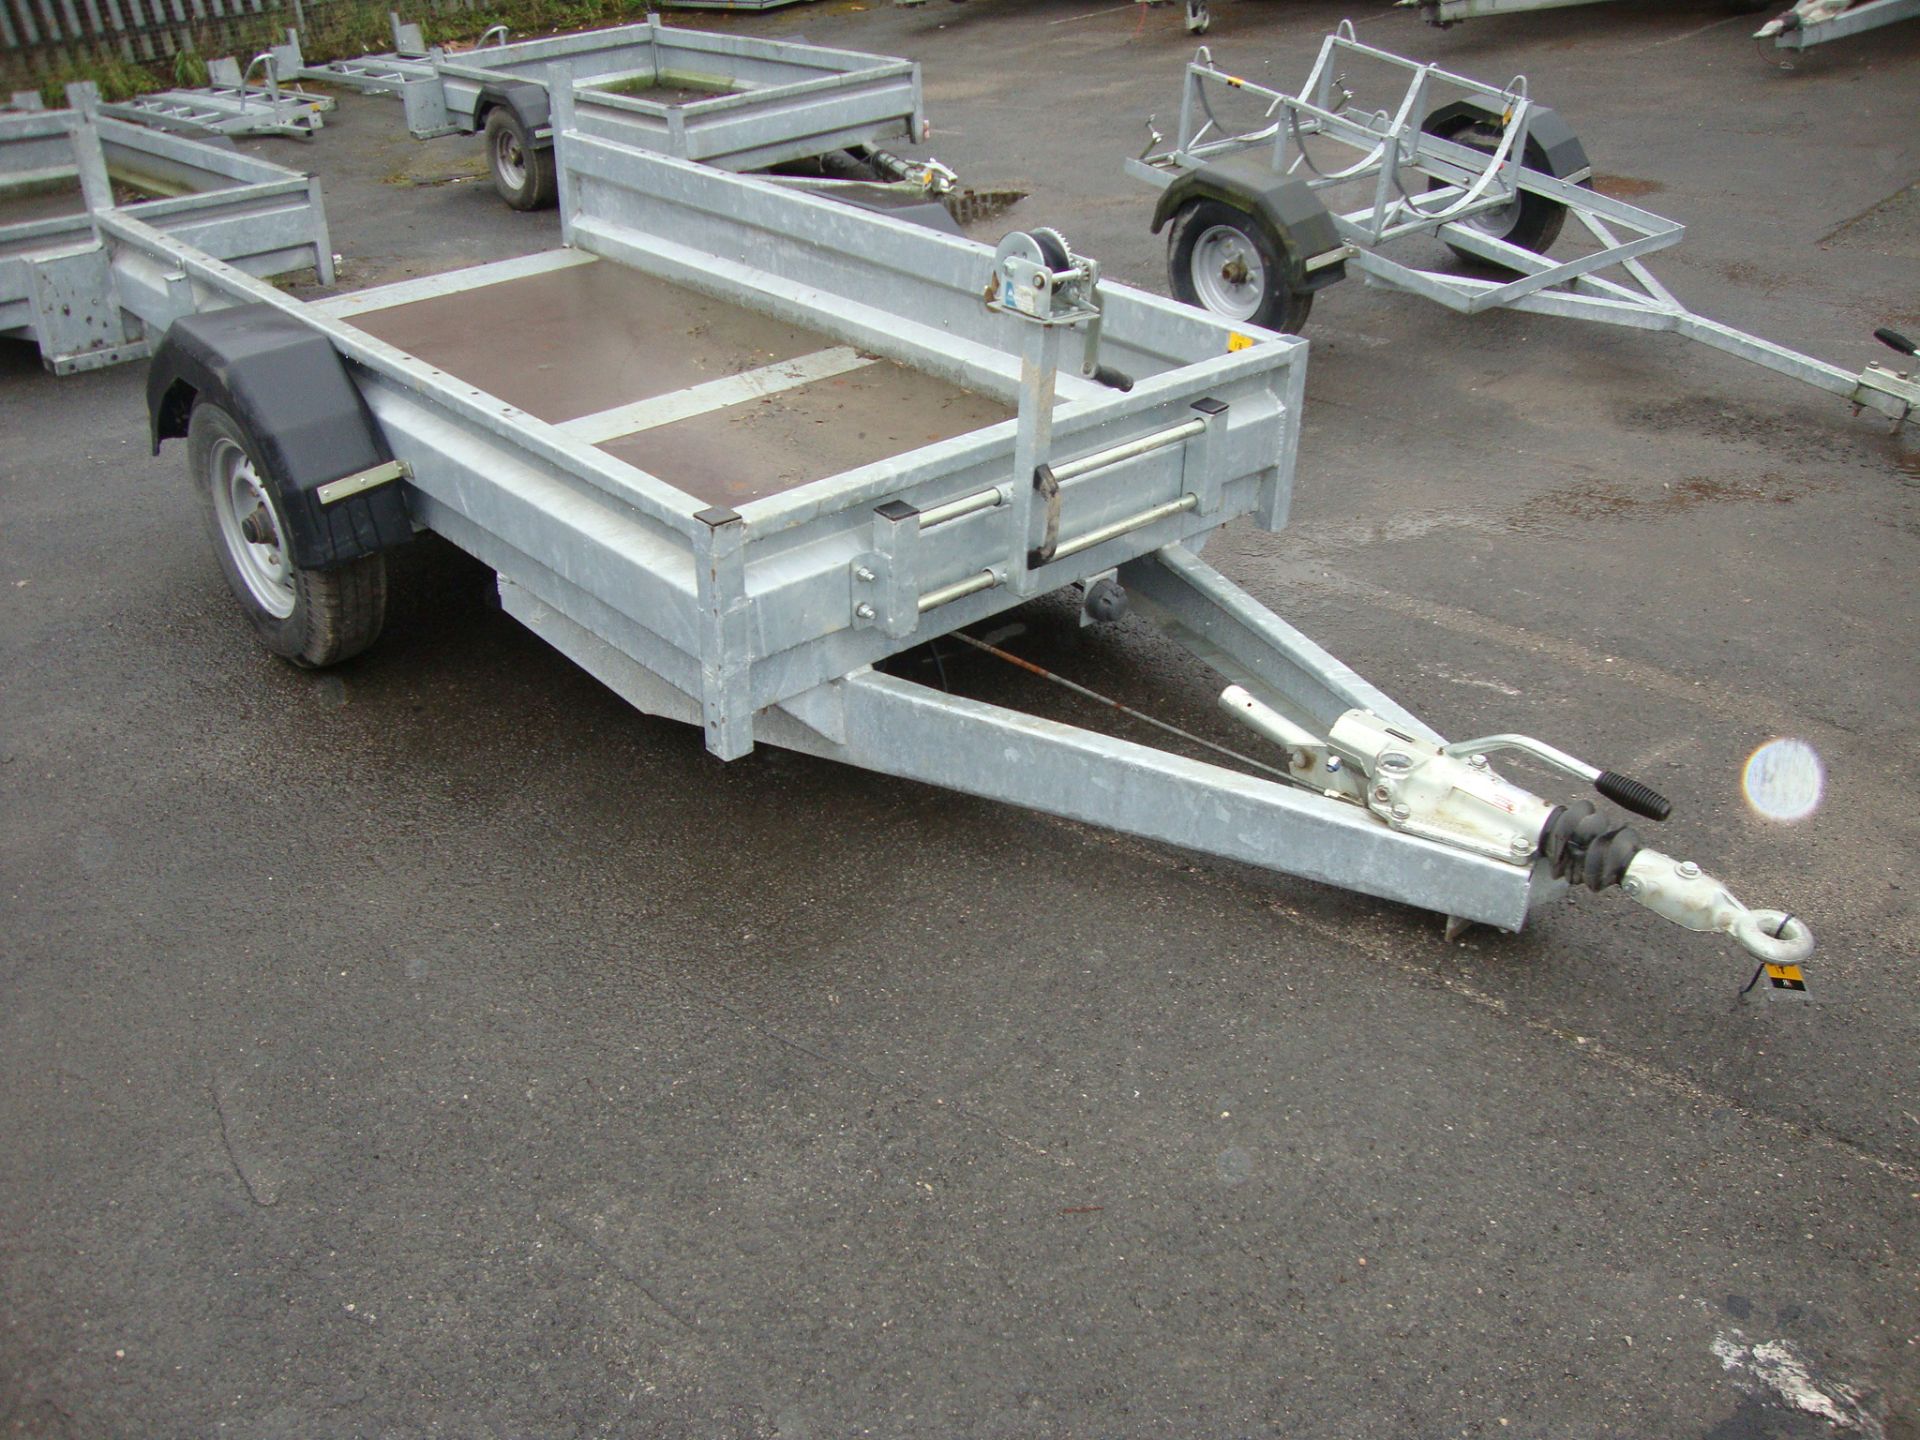 Single axle trailer with open rear (suitable for attaching a small drop down panel or a large ramp), - Image 2 of 7